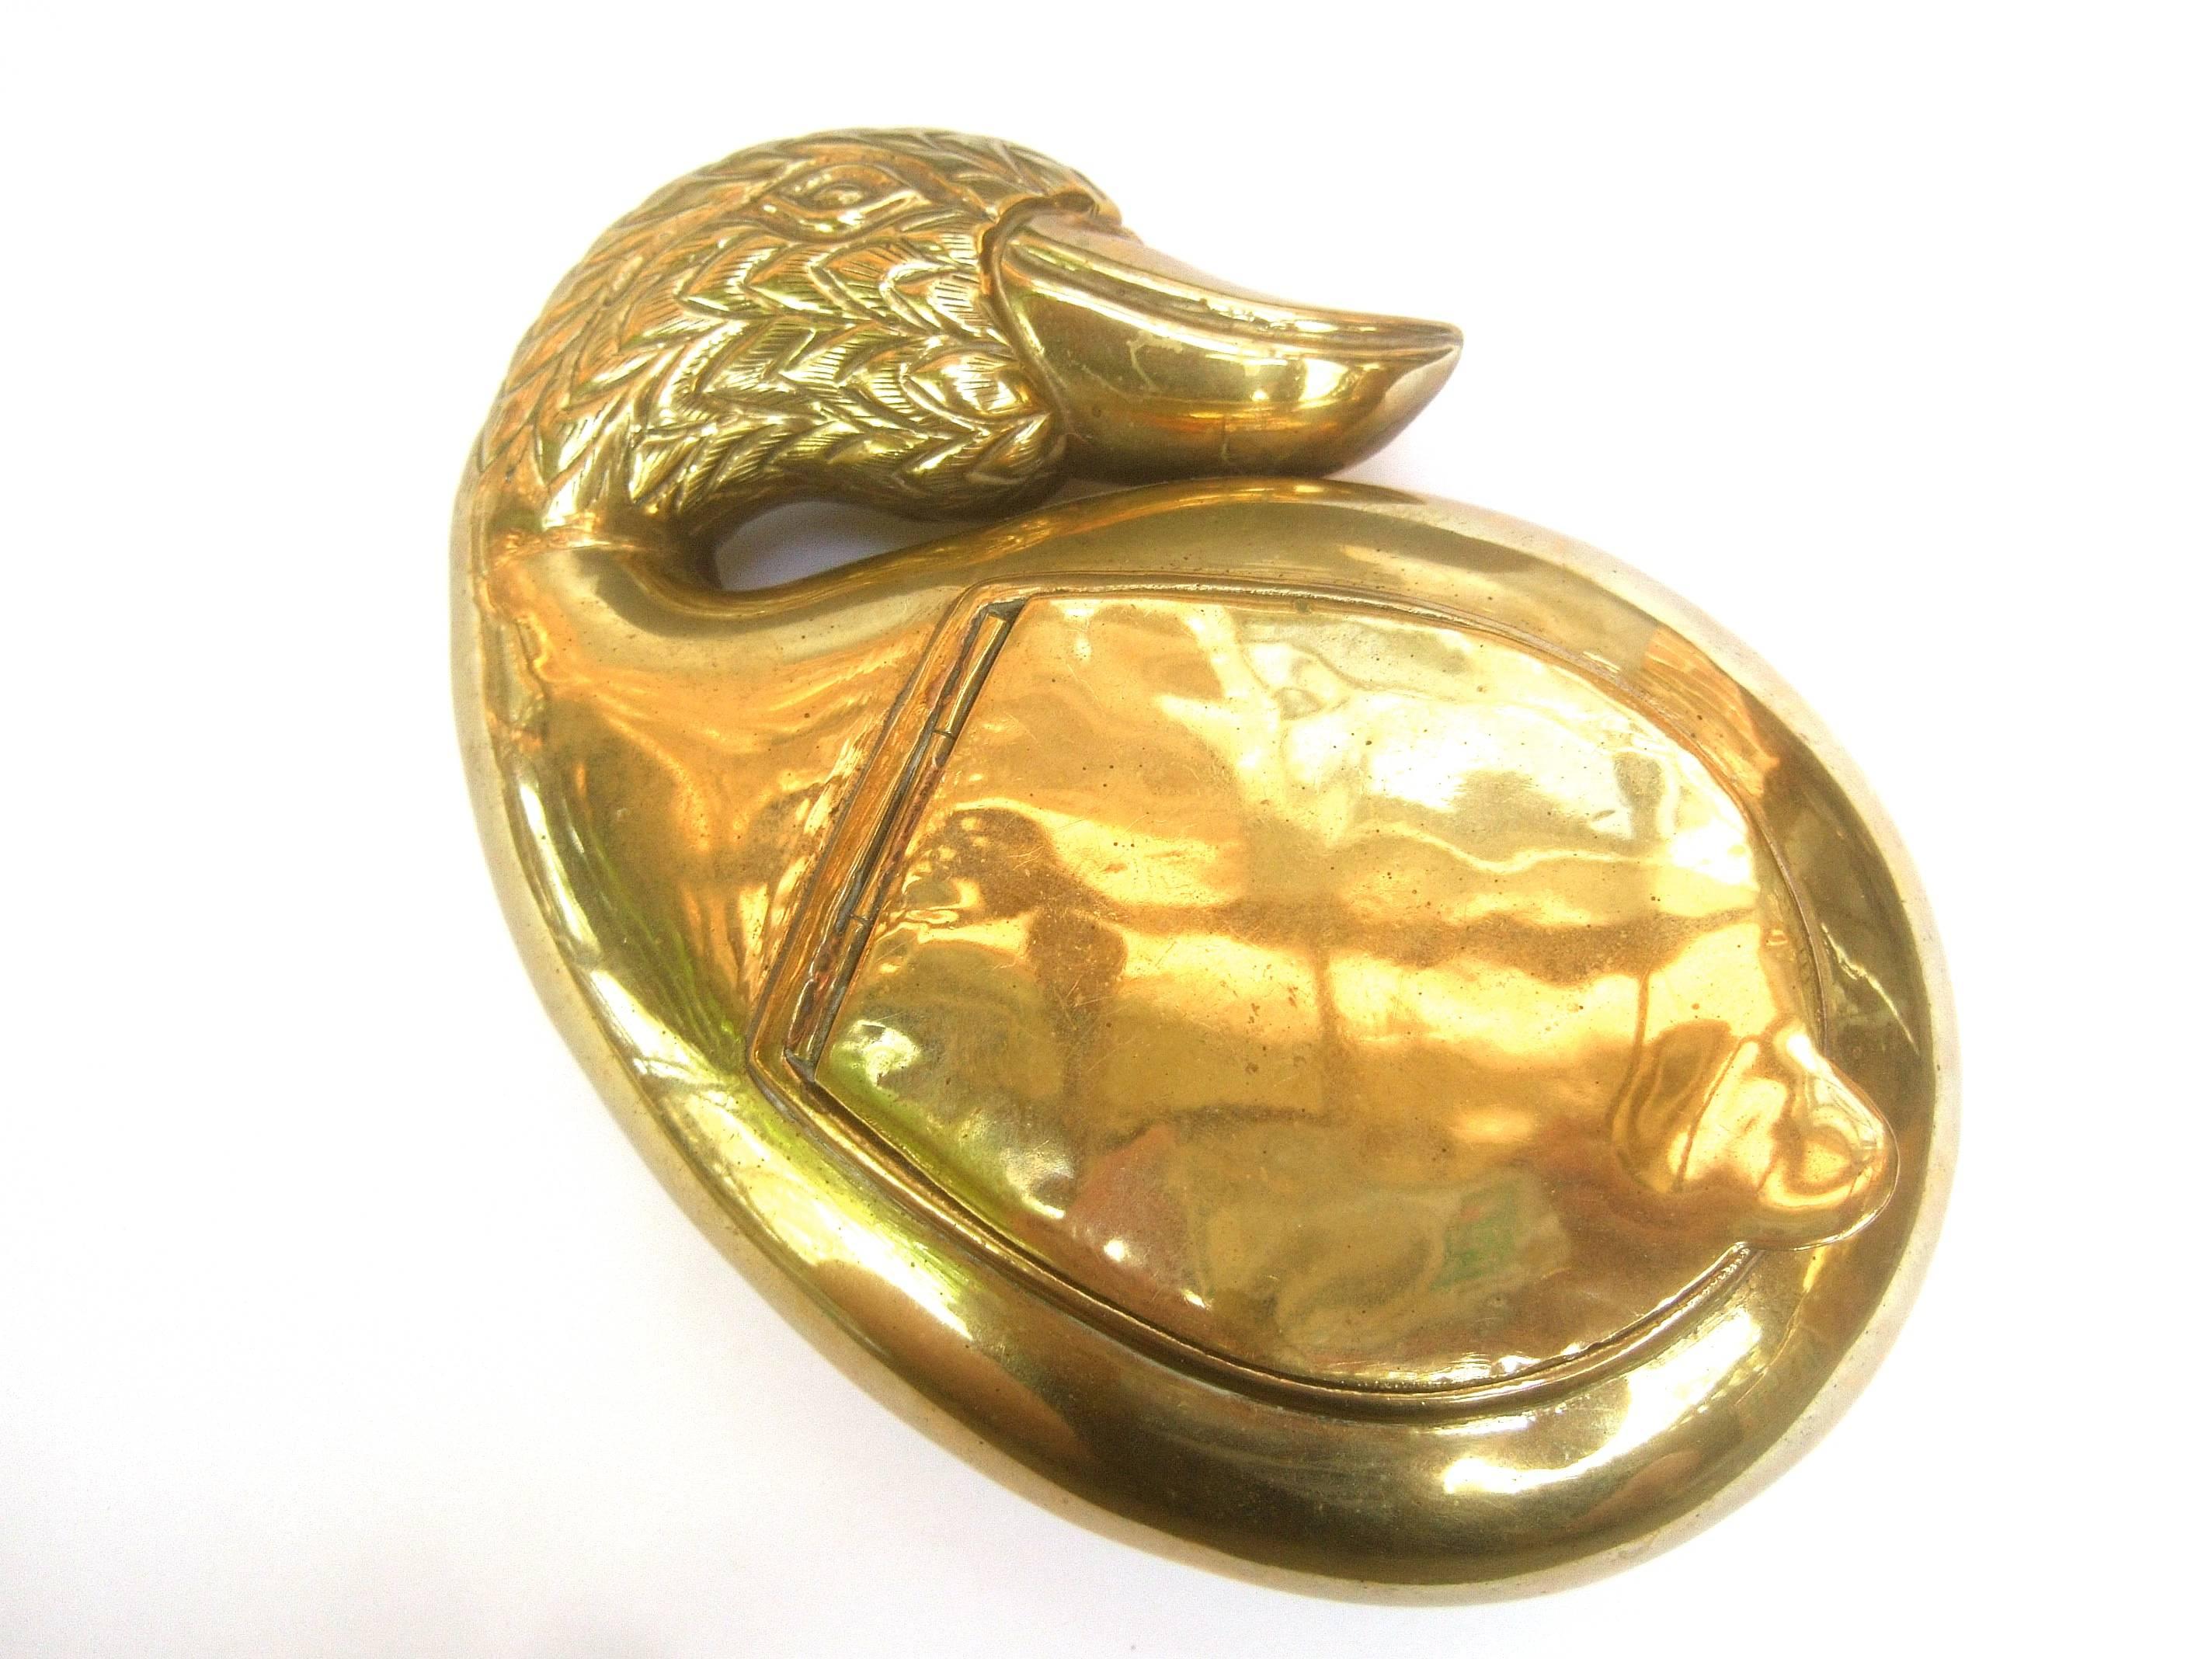 Exotic brass metal bird evening bag c 1990s
The sleek brass metal clutch purse
is designed in the shape of a stylized 
bird

The bird's head has etched metal designs
that emulate feathers with an elongated 
beak 

The back exterior side is designed